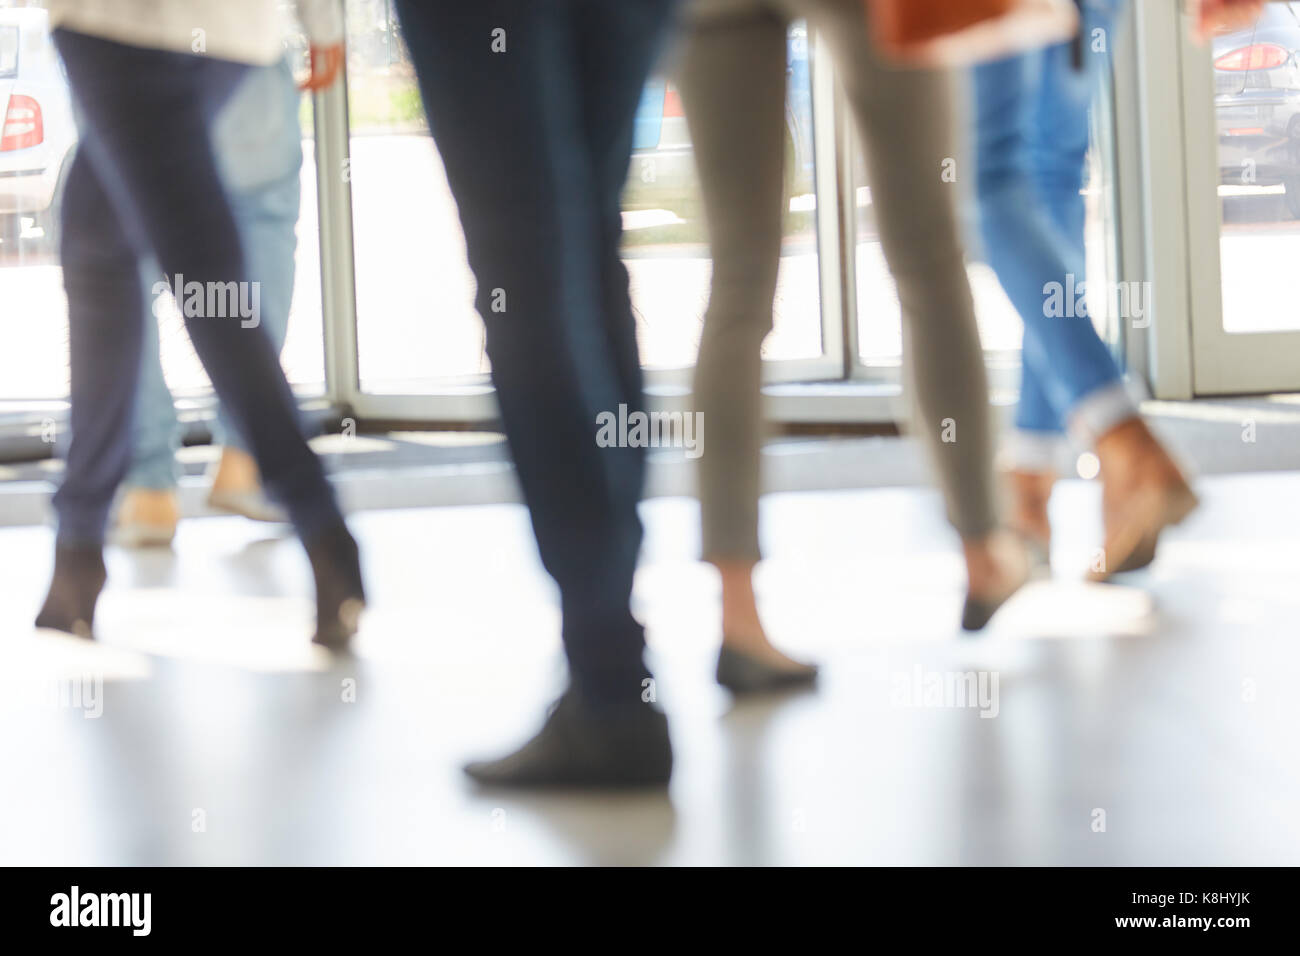 Students in university revolving door as a group Stock Photo